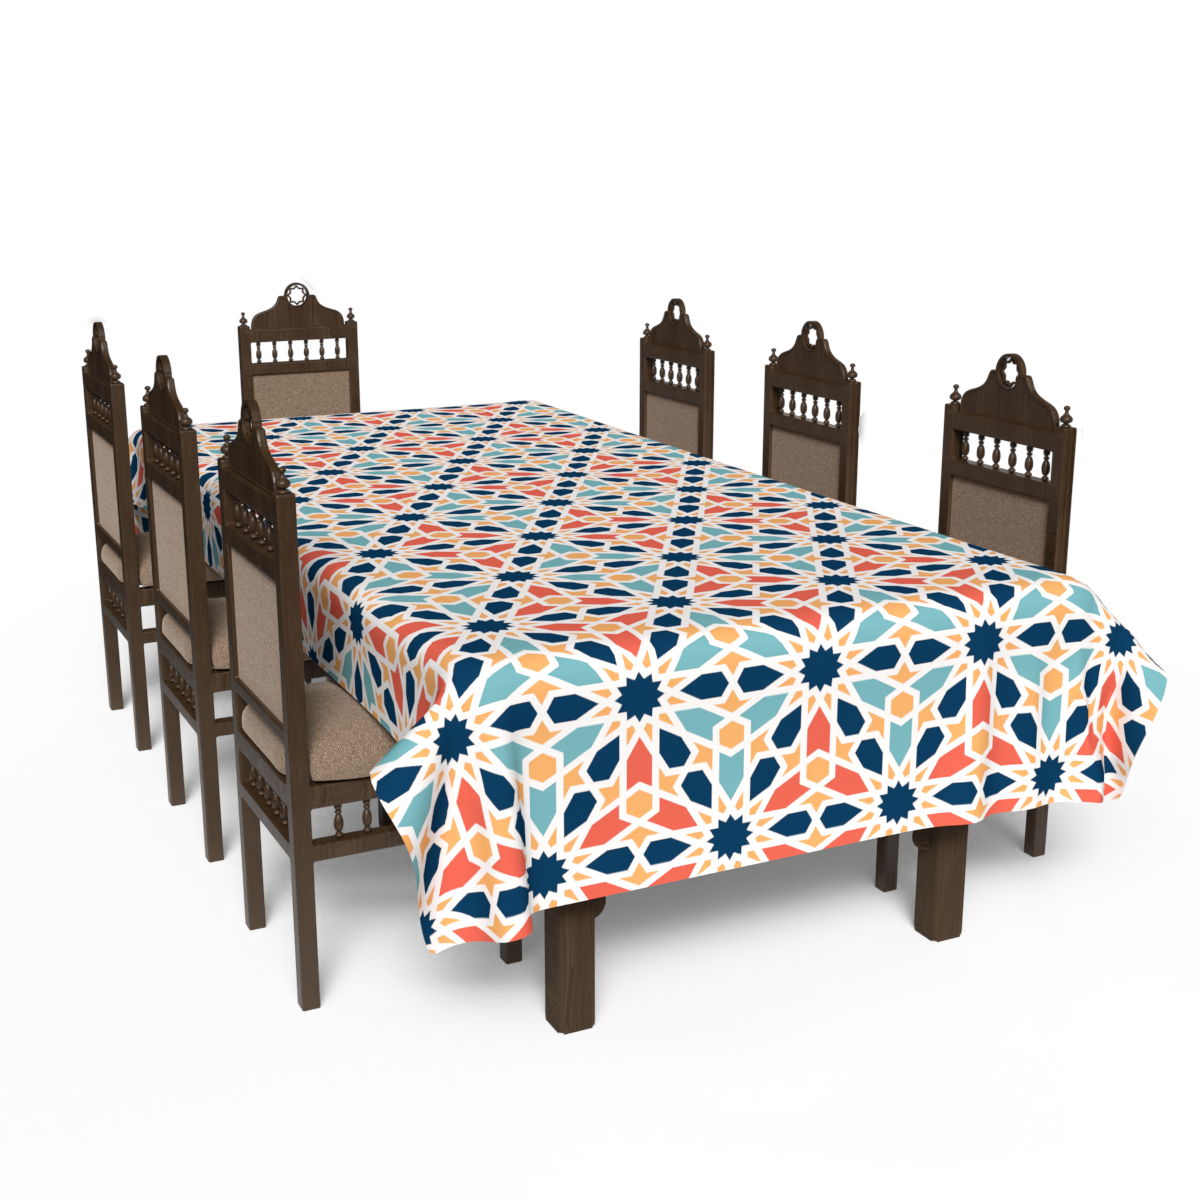 Table cloth - multiple sizes - ROM543